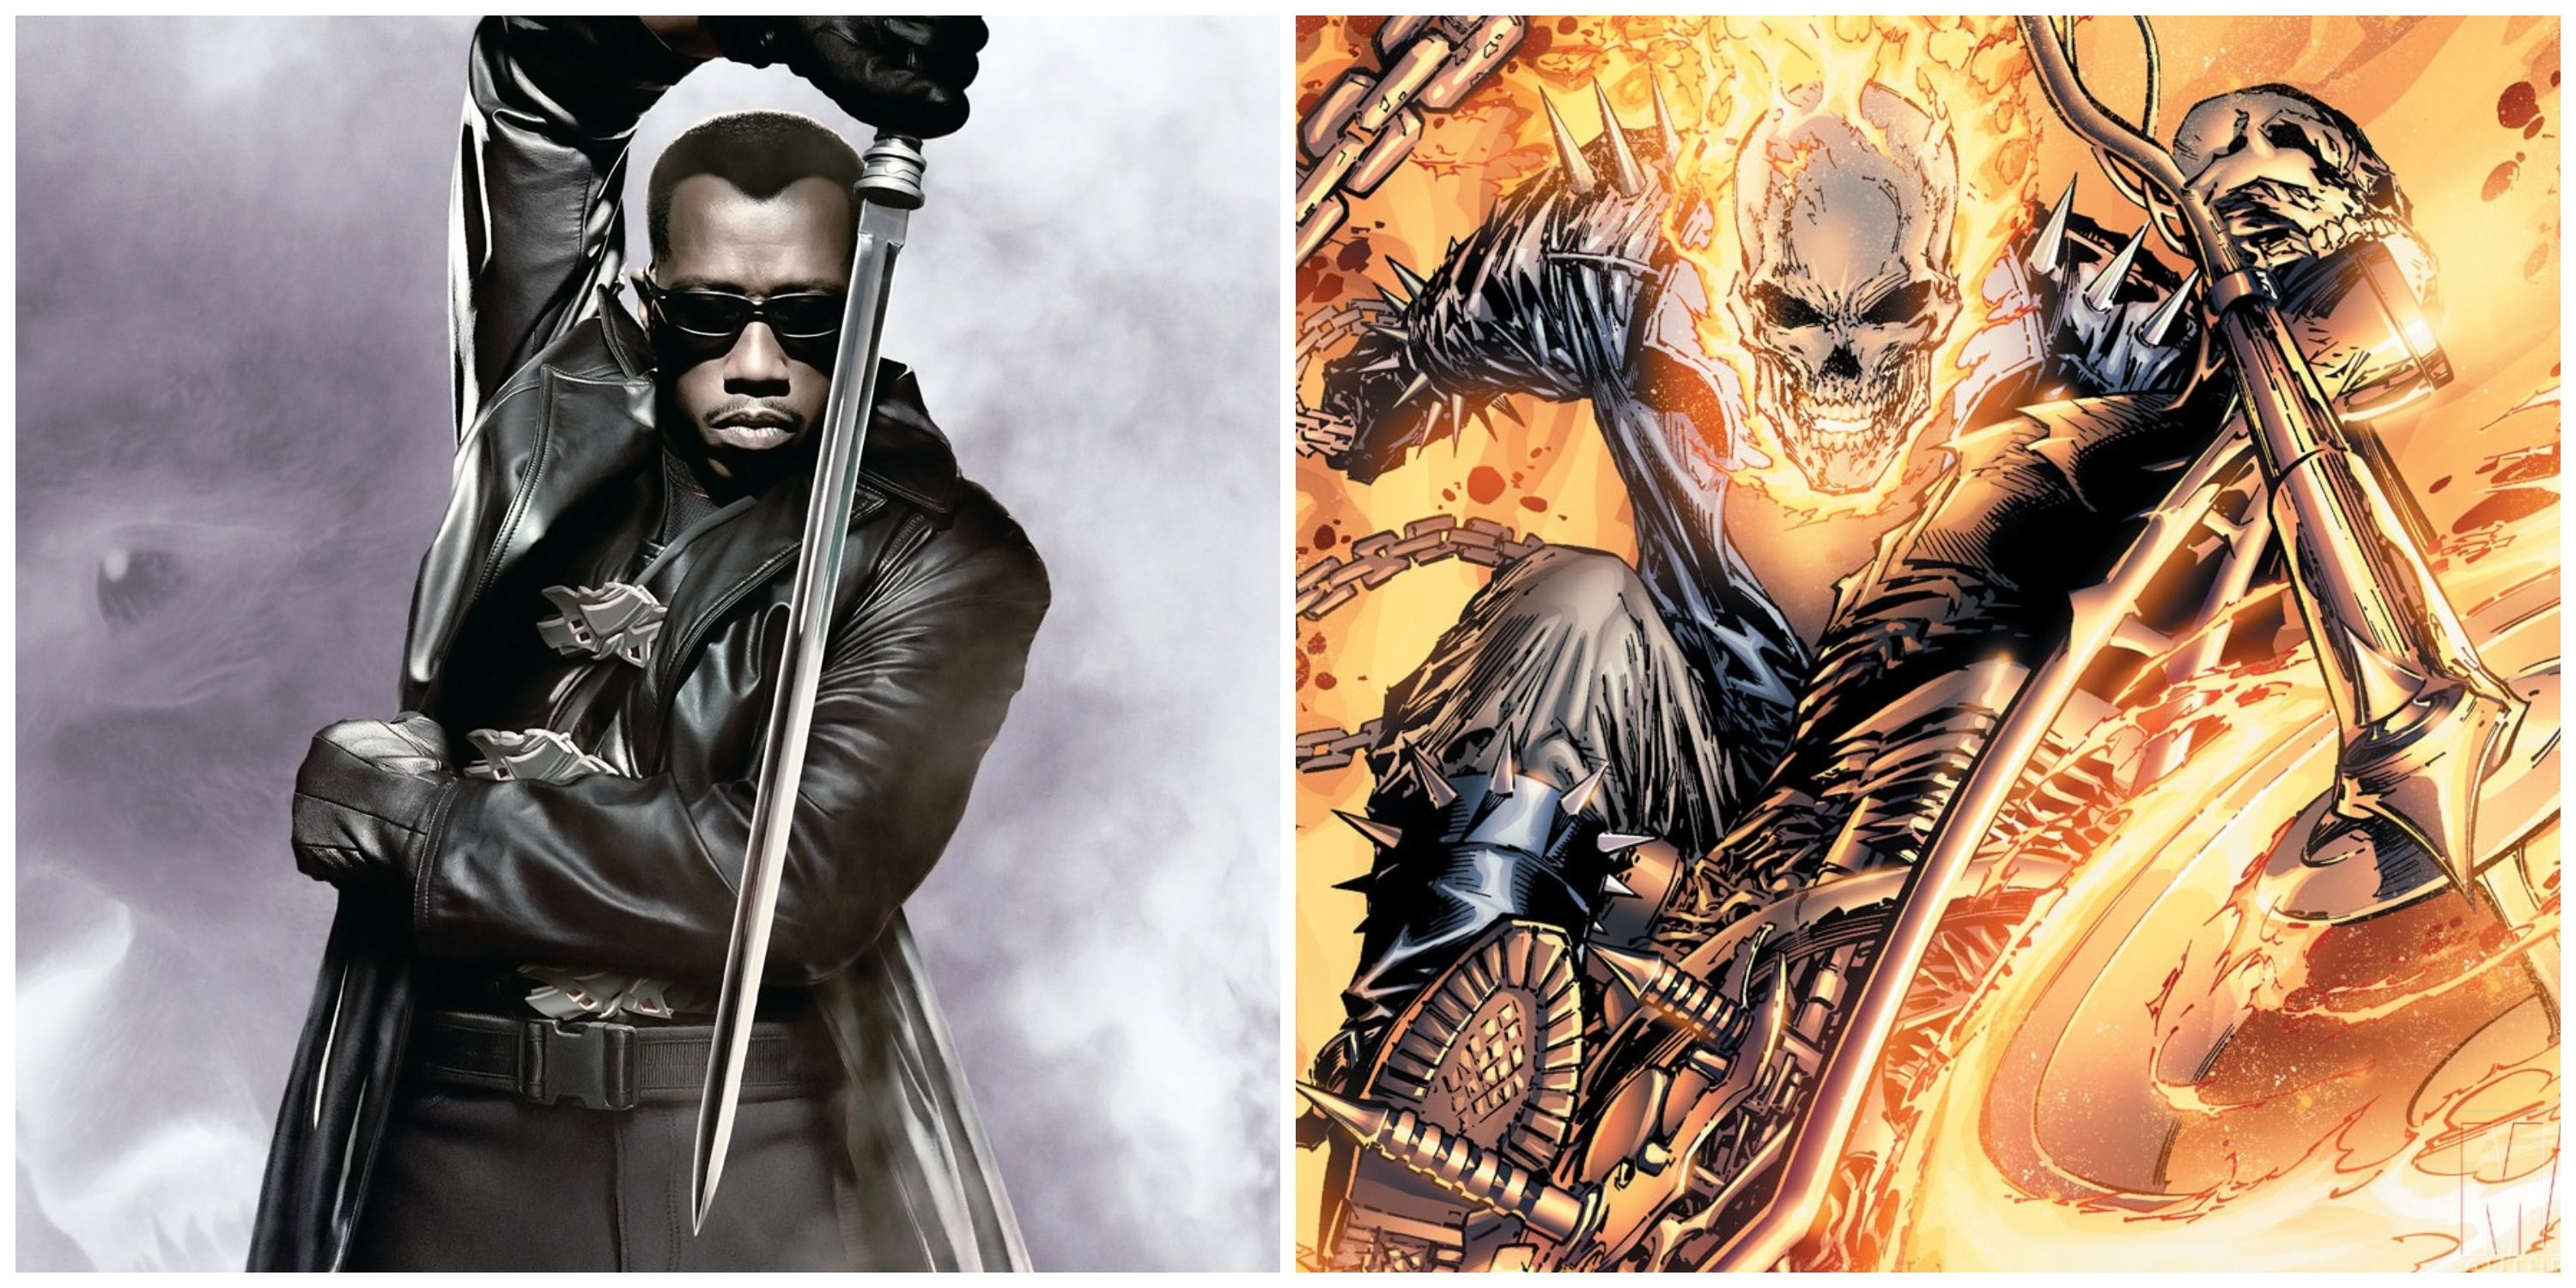 split image: Wesley Snipes as Blade and Ghost Rider in the comics